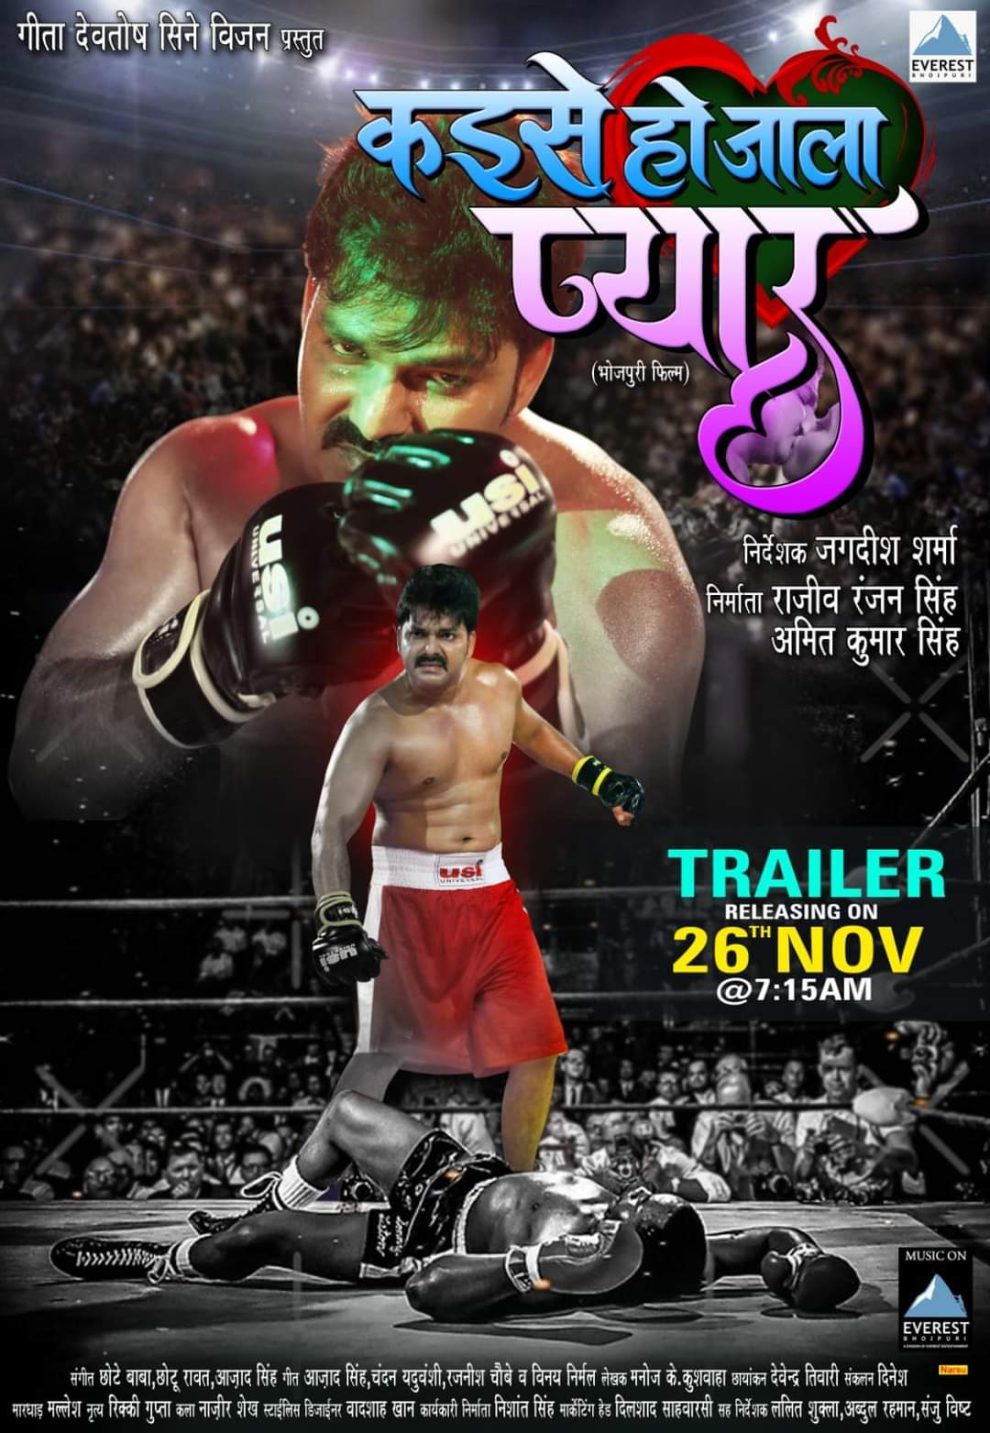 Trailer of Pawan Singh's film 'Kaise Ho Jala Pyar' will be out tomorrow from Everest Music Company